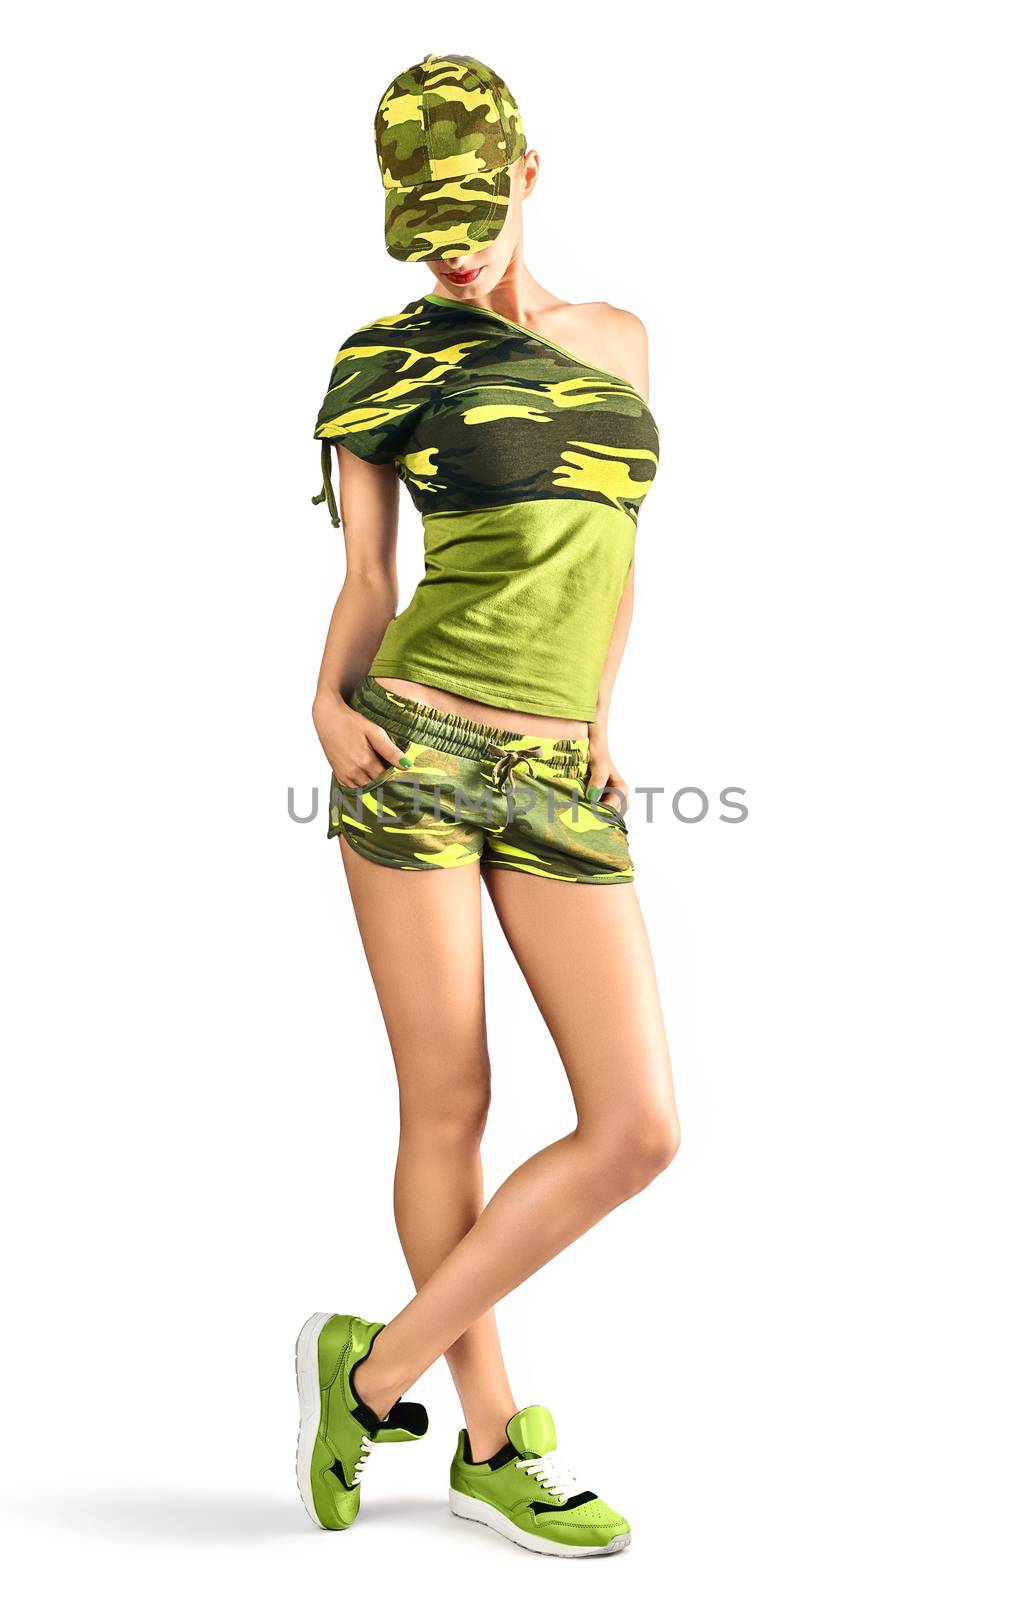 Fashion woman camouflage clothes doing gun gesture by 918